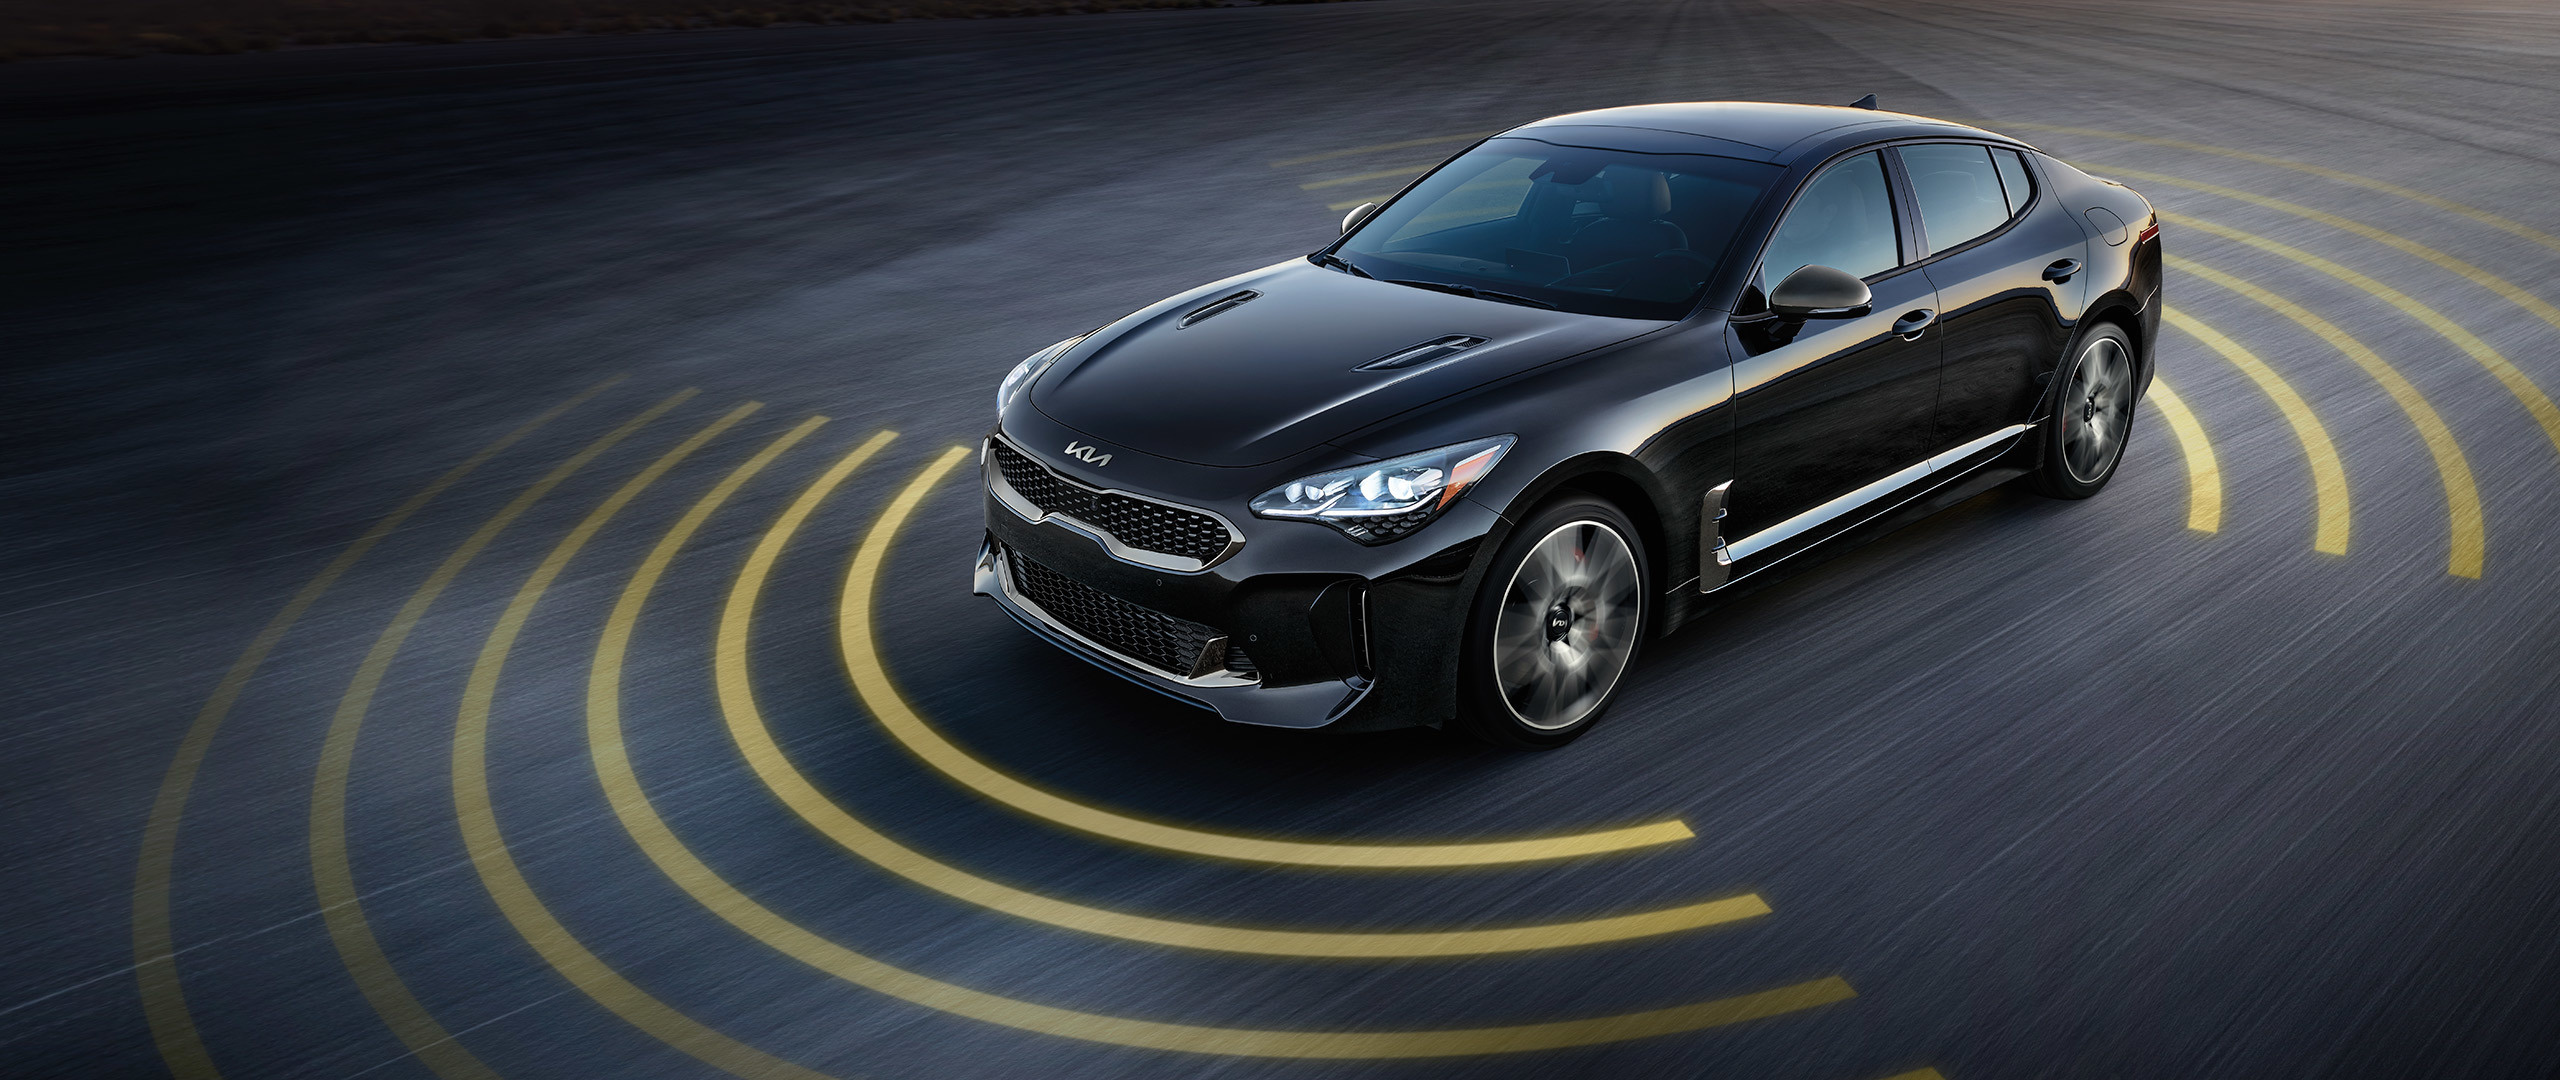 2022 Kia Stinger Equipped With Kia Drive Wise Advanced Driver-Assistance Safety Features